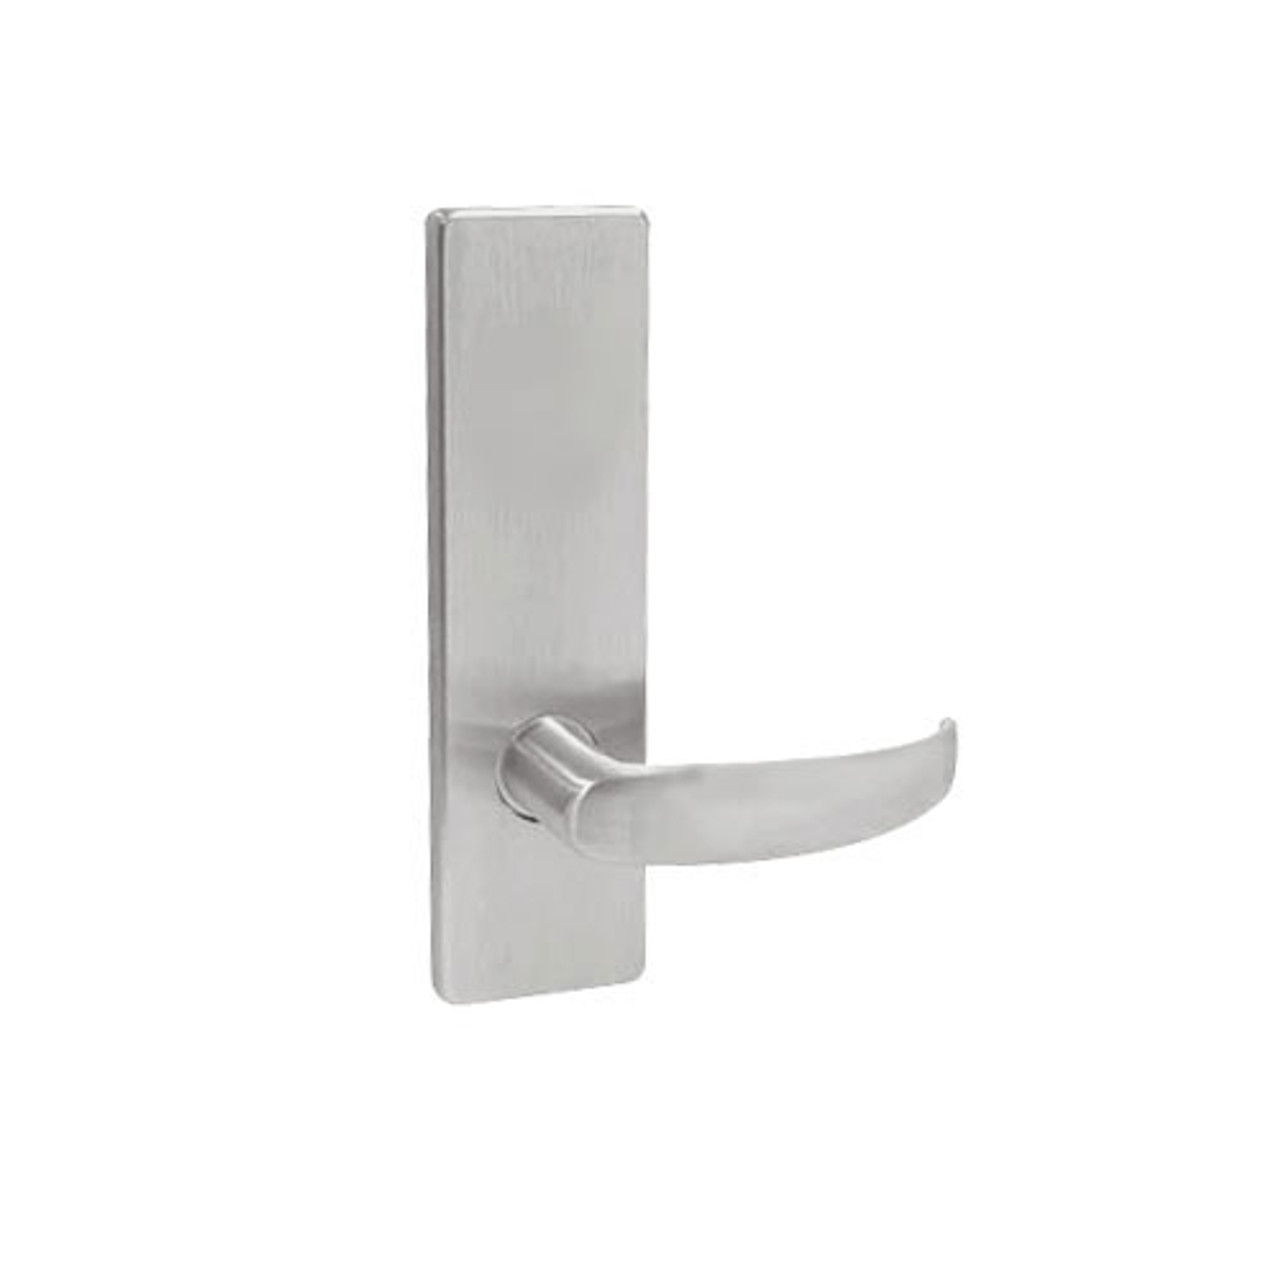 MA161-QN-630 Falcon Mortise Locks MA Series Exit/Connecting QN Lever with Escutcheon Style in Satin Stainless Finish